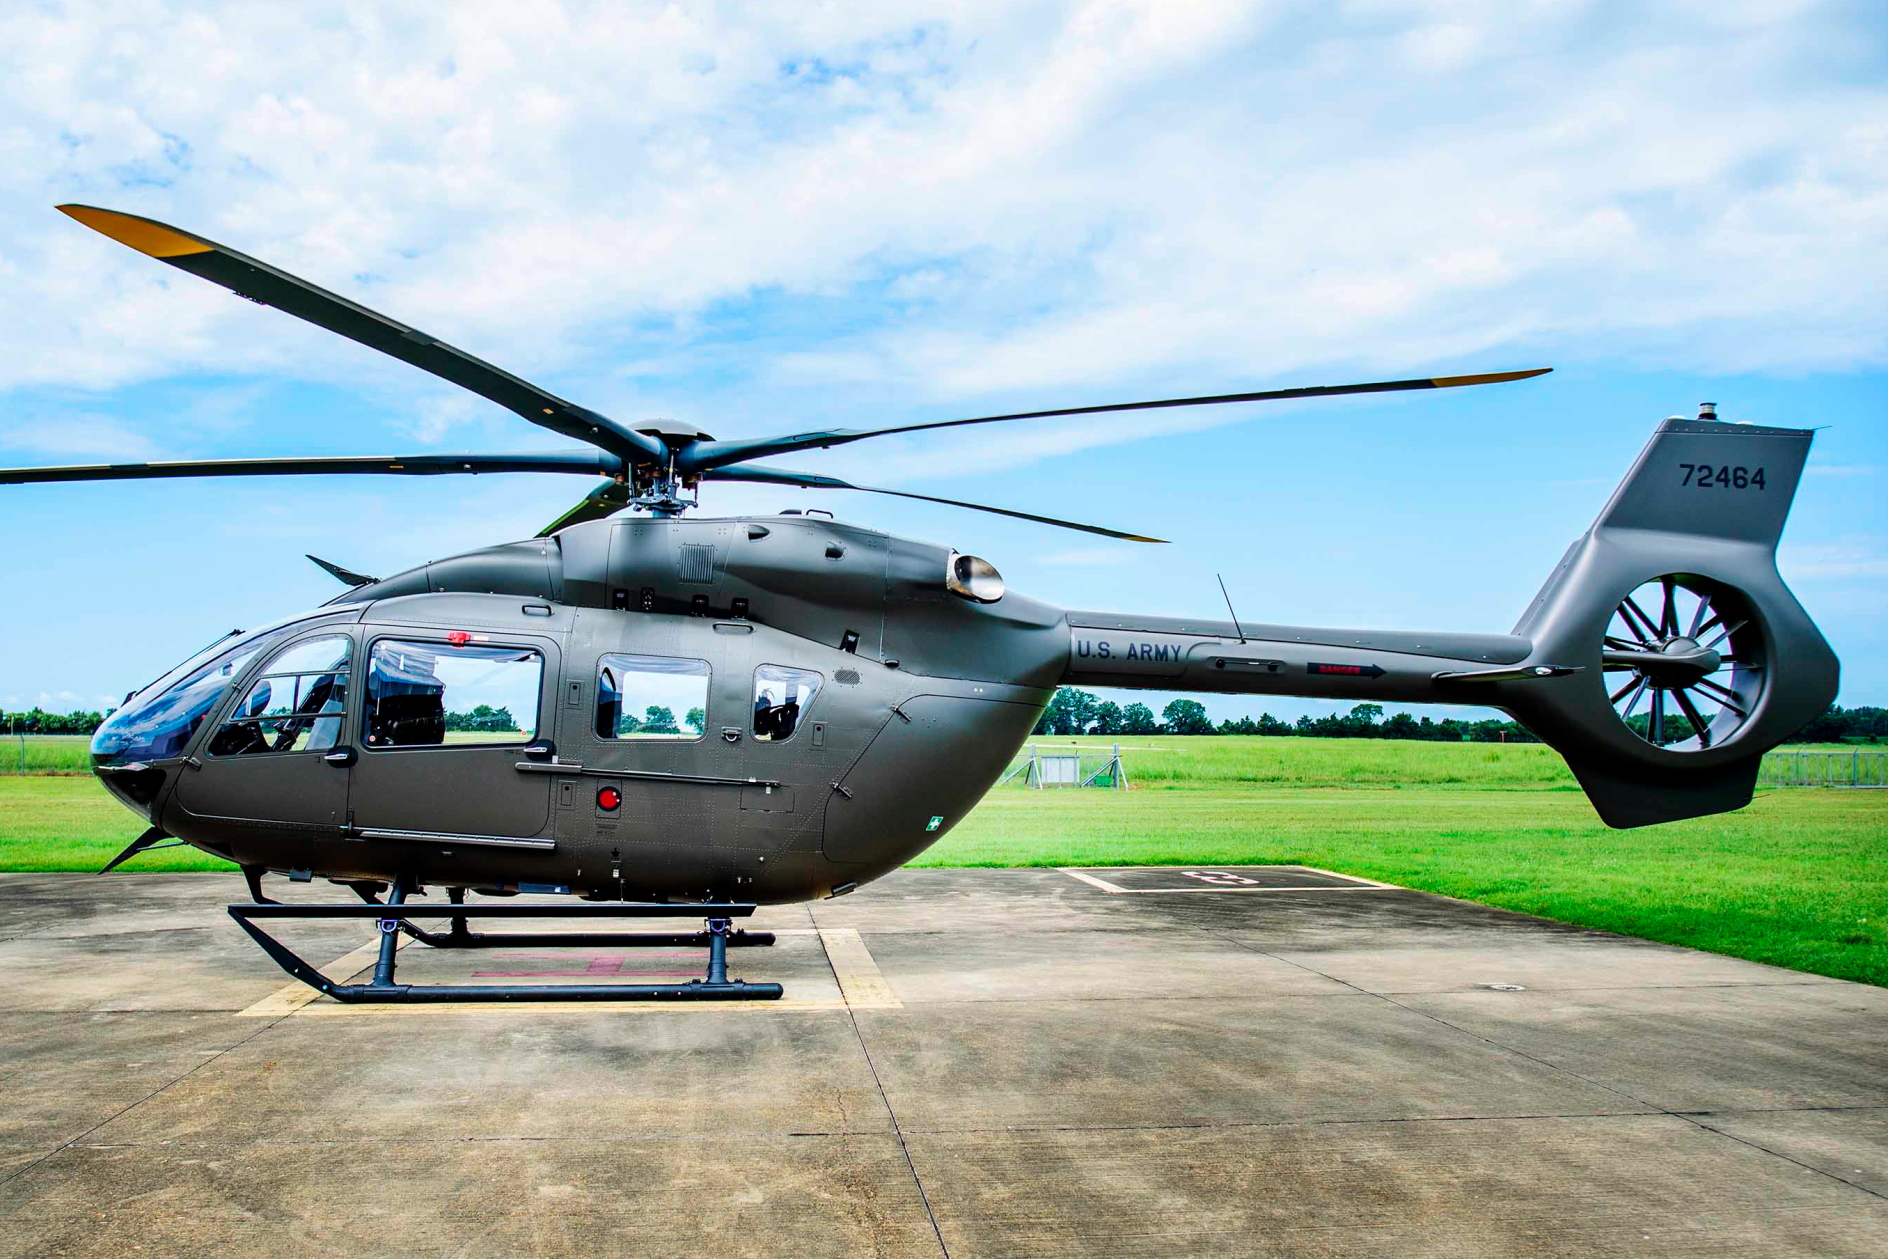 The U.S. Army National Guard has taken delivery of the first UH-72B, the latest variant of its Lakota helicopter, from Airbus’ production facility in Columbus, Mississippi. Picture by Dianne Bond. Click to enlarge.